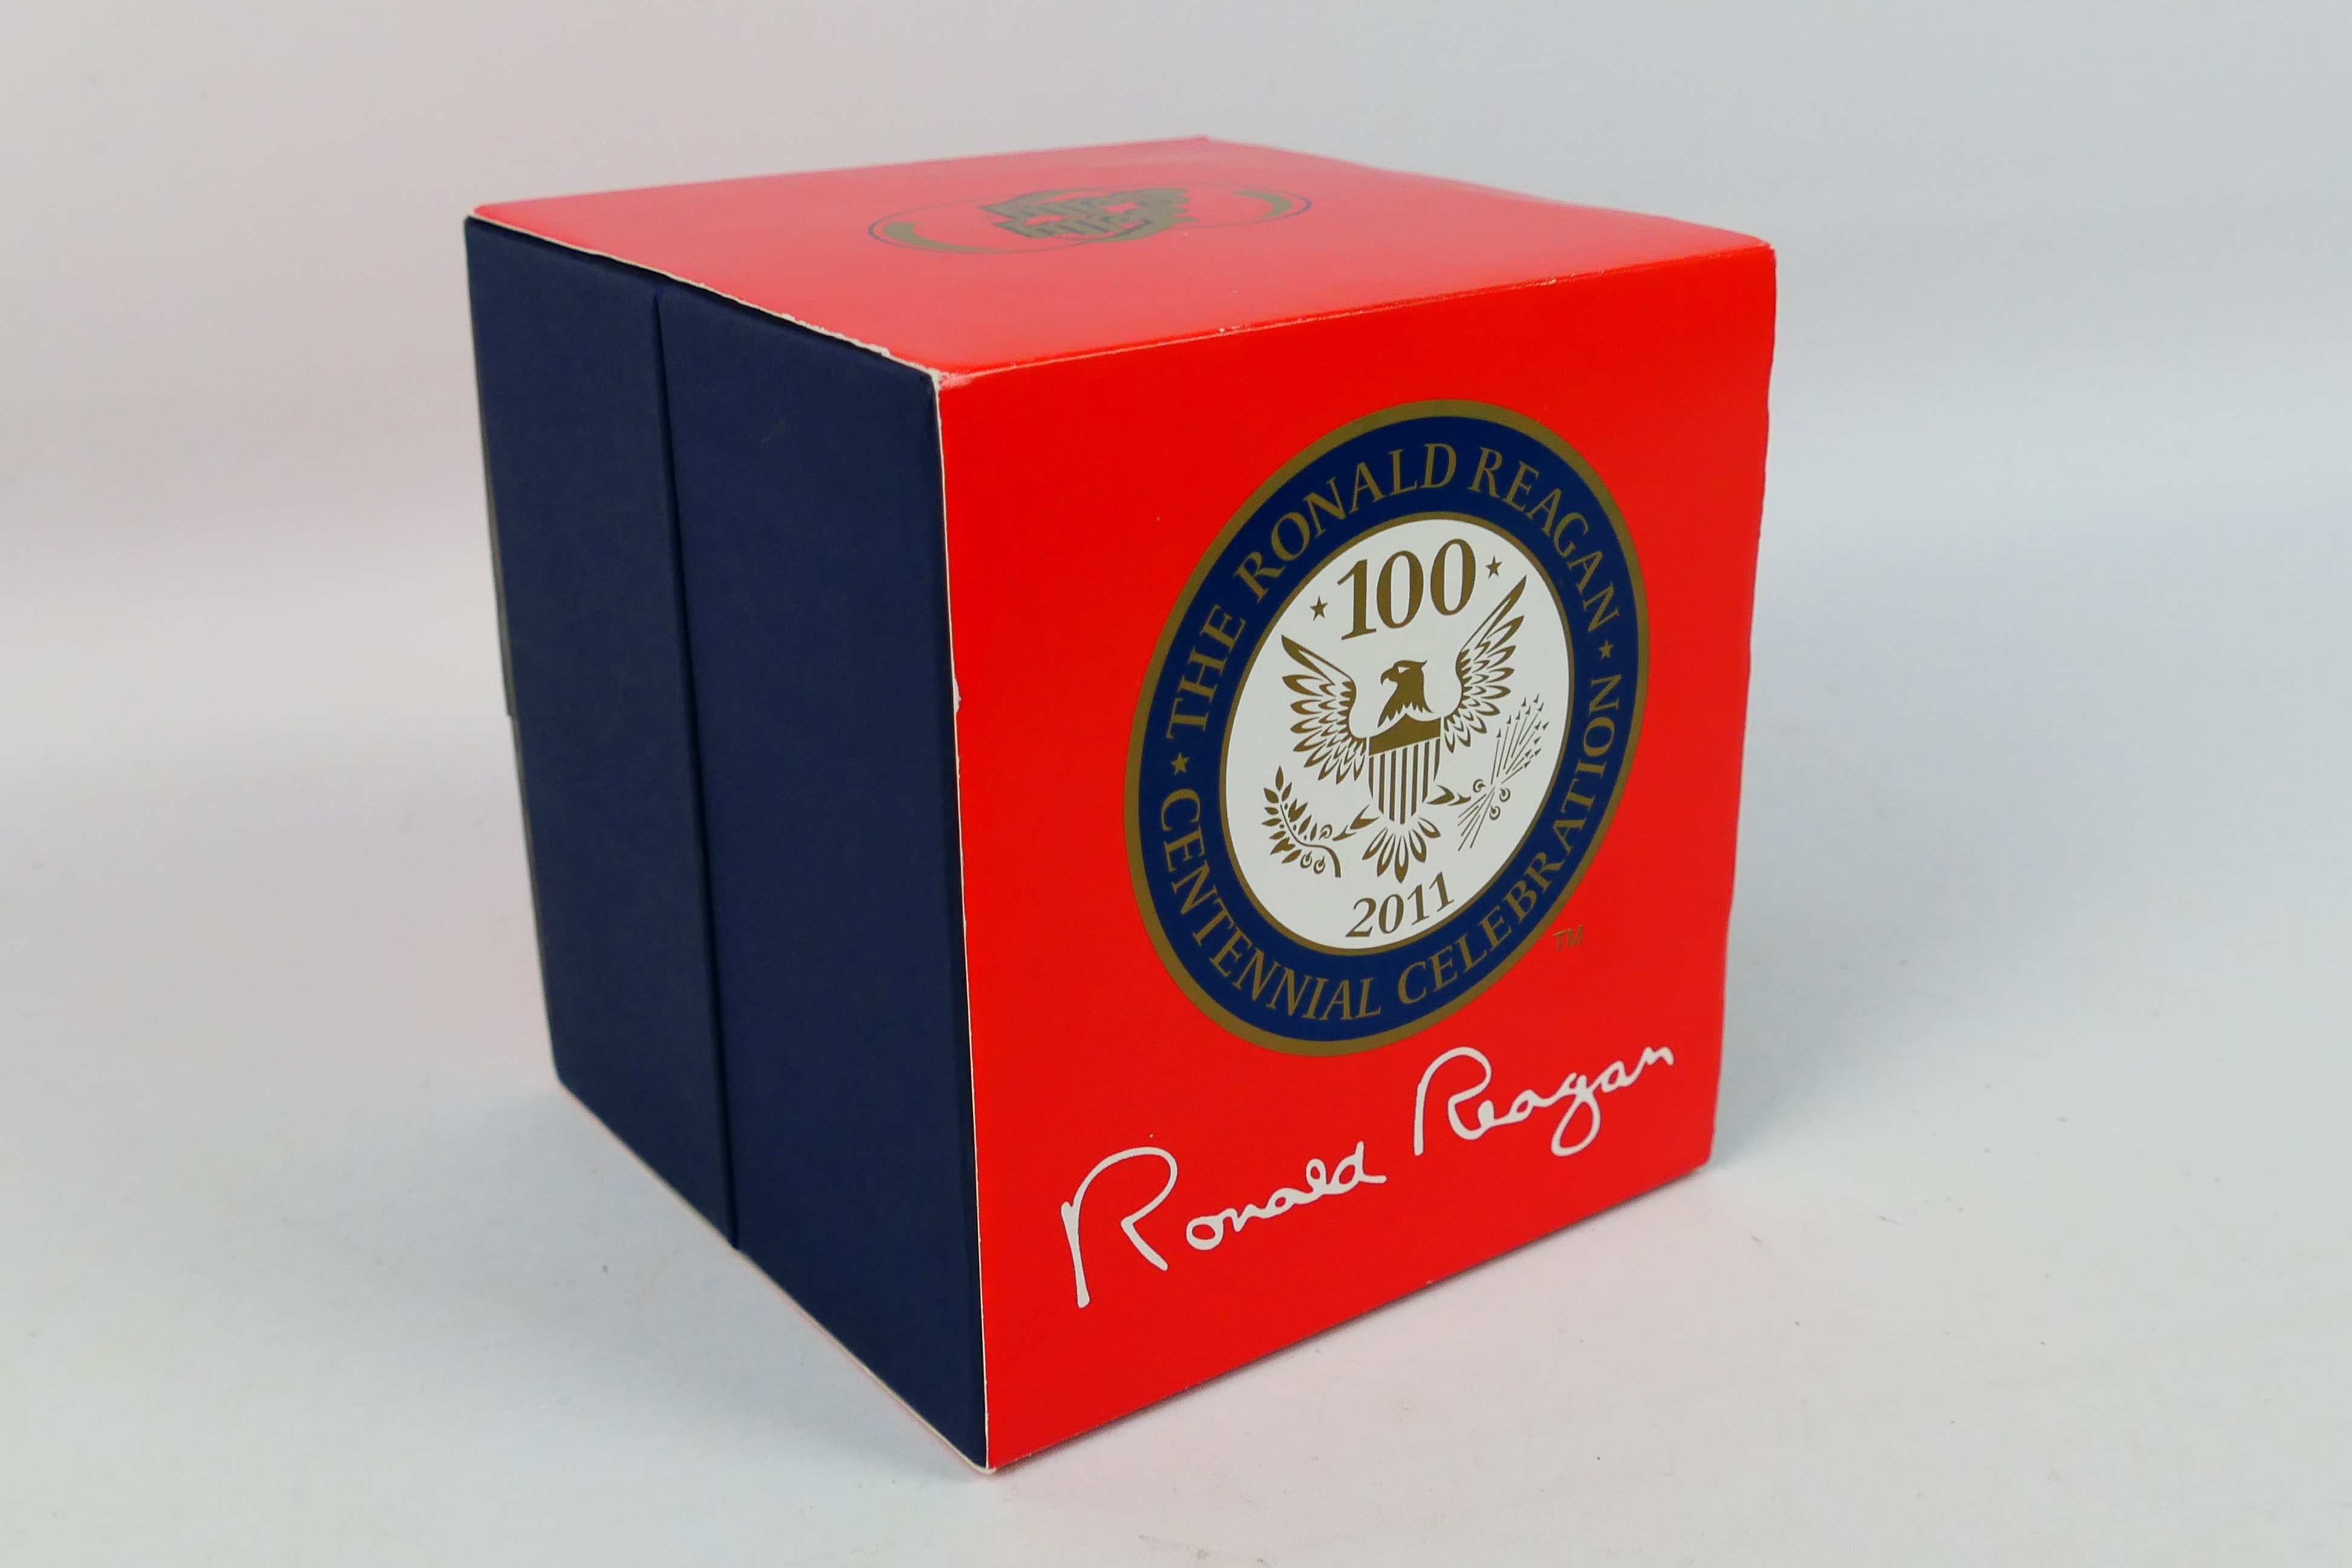 Ronald Reagan - An unopened and boxed special edition jar of Jelly Belly jelly beans produced for - Image 8 of 8